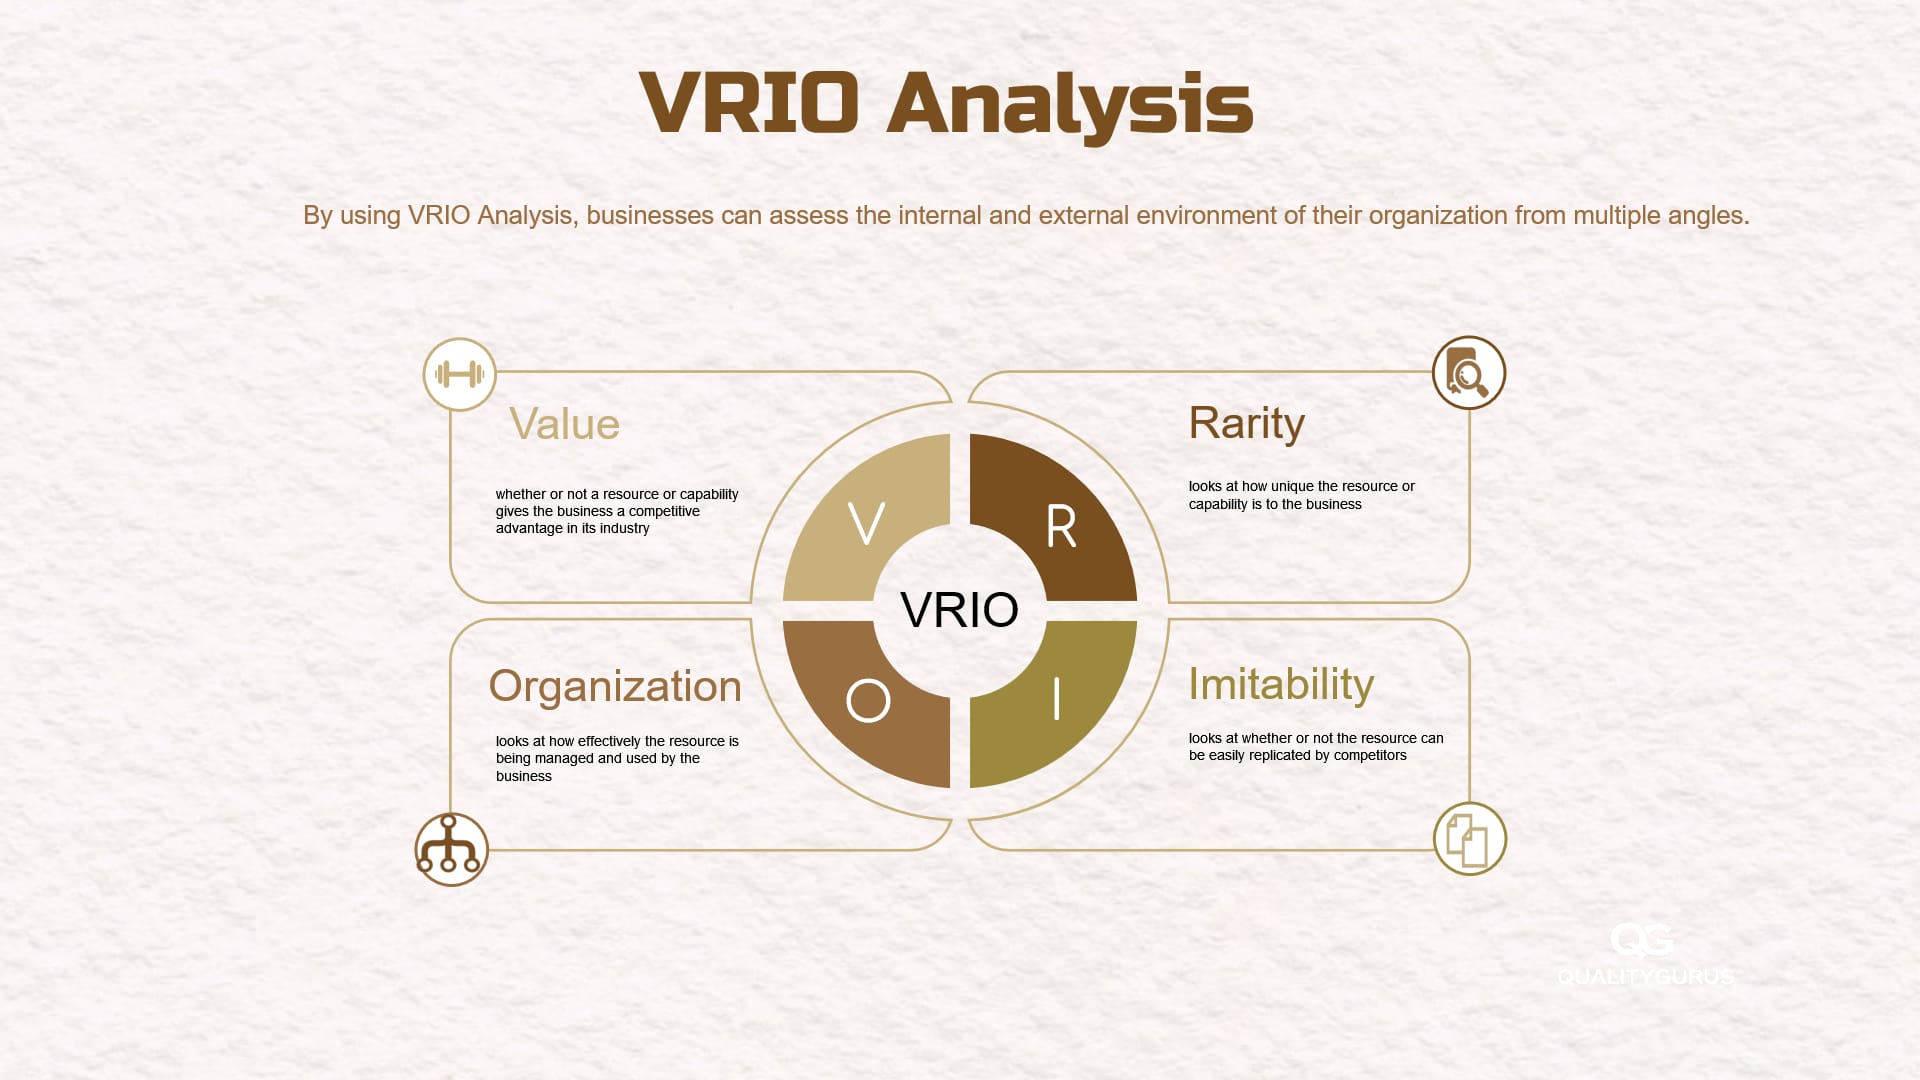 Maximize your company's potential with VRIO analysis